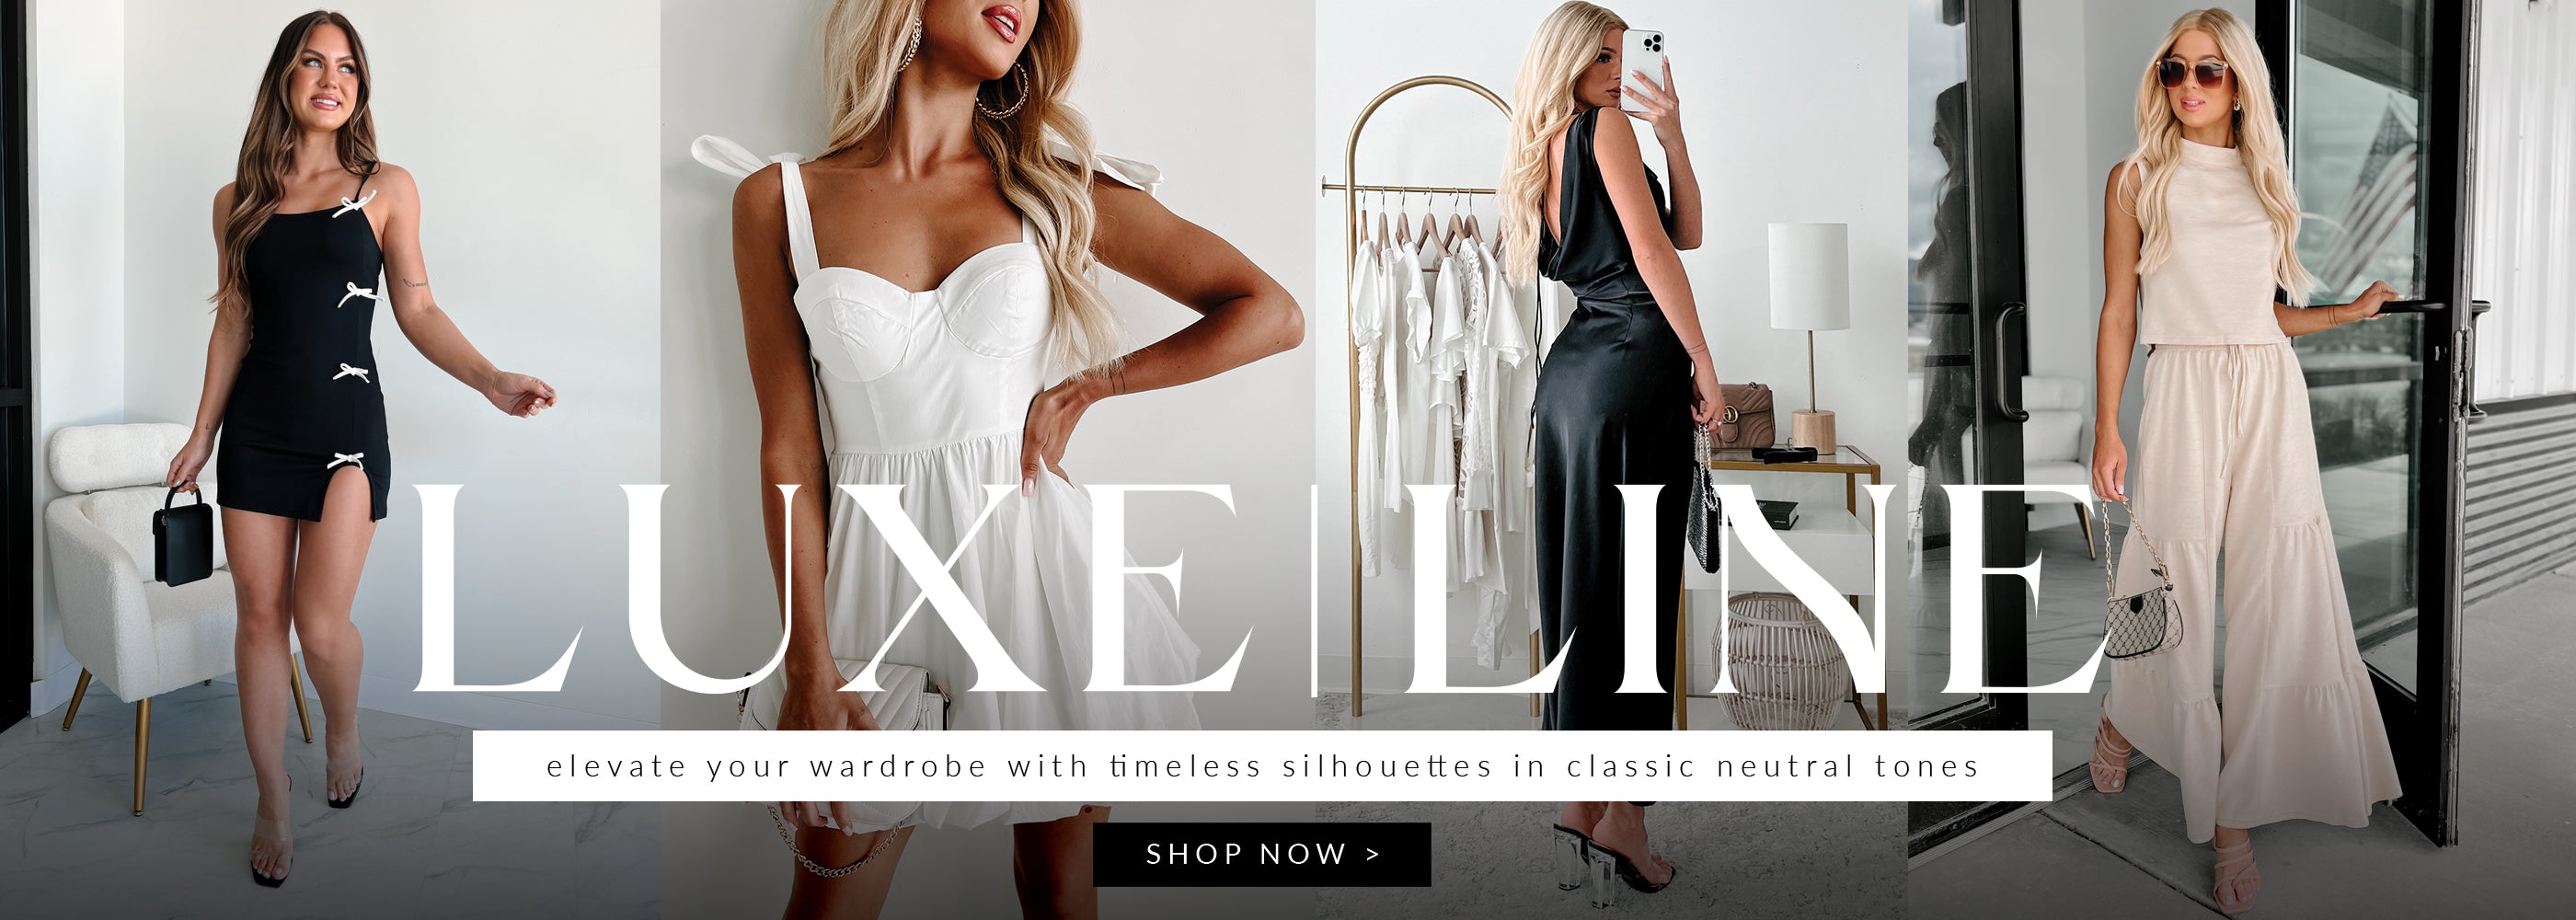 Collage of model wearing black white and cream summer styles. Headline says "Luxe Line" elevate your wardrobe with timeless silhouettes in classic neutral tones. Links to the Lux Line.